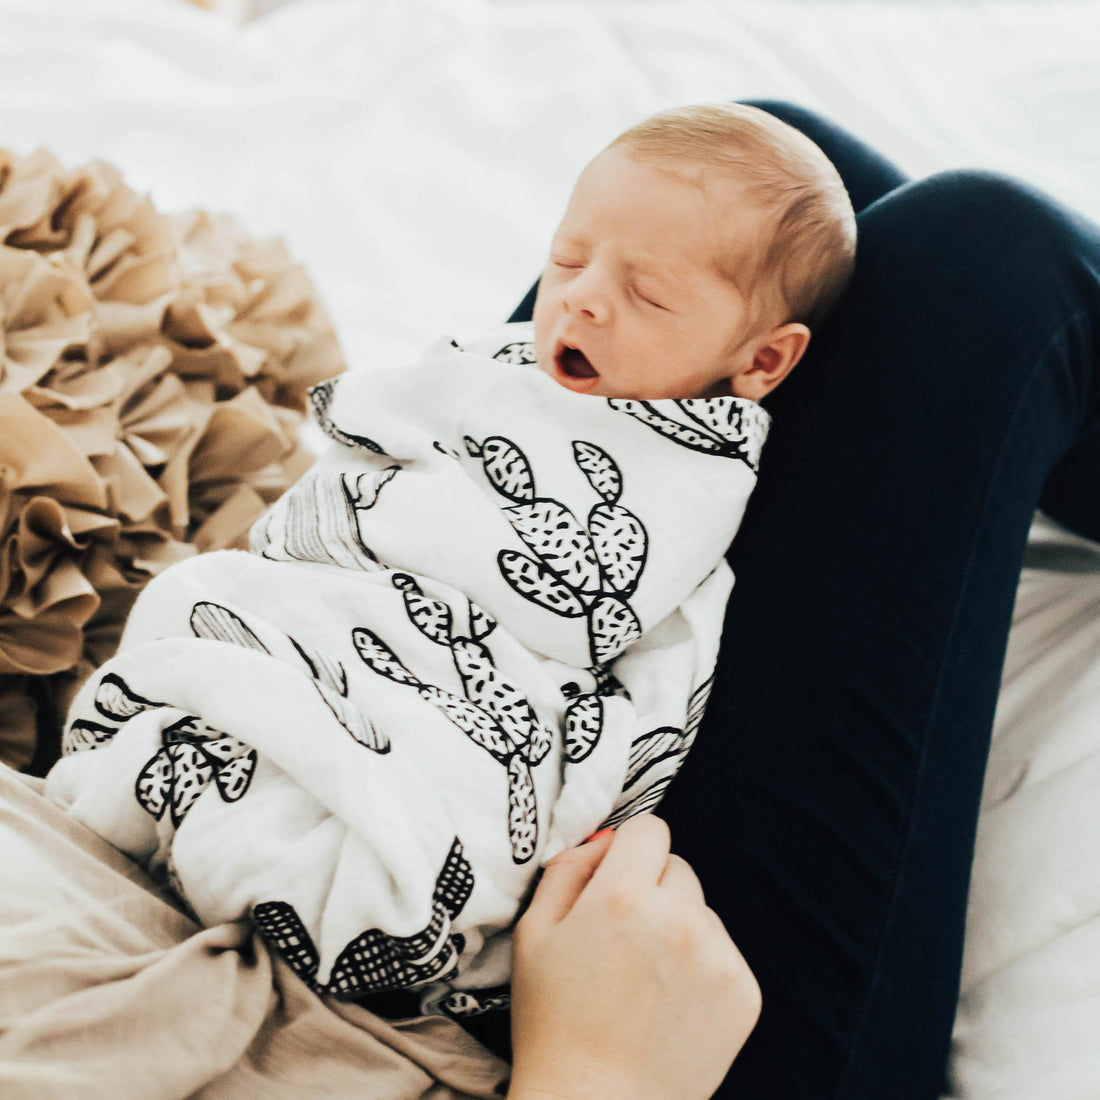 7 Products You ACTUALLY Need in Your Baby's First Year